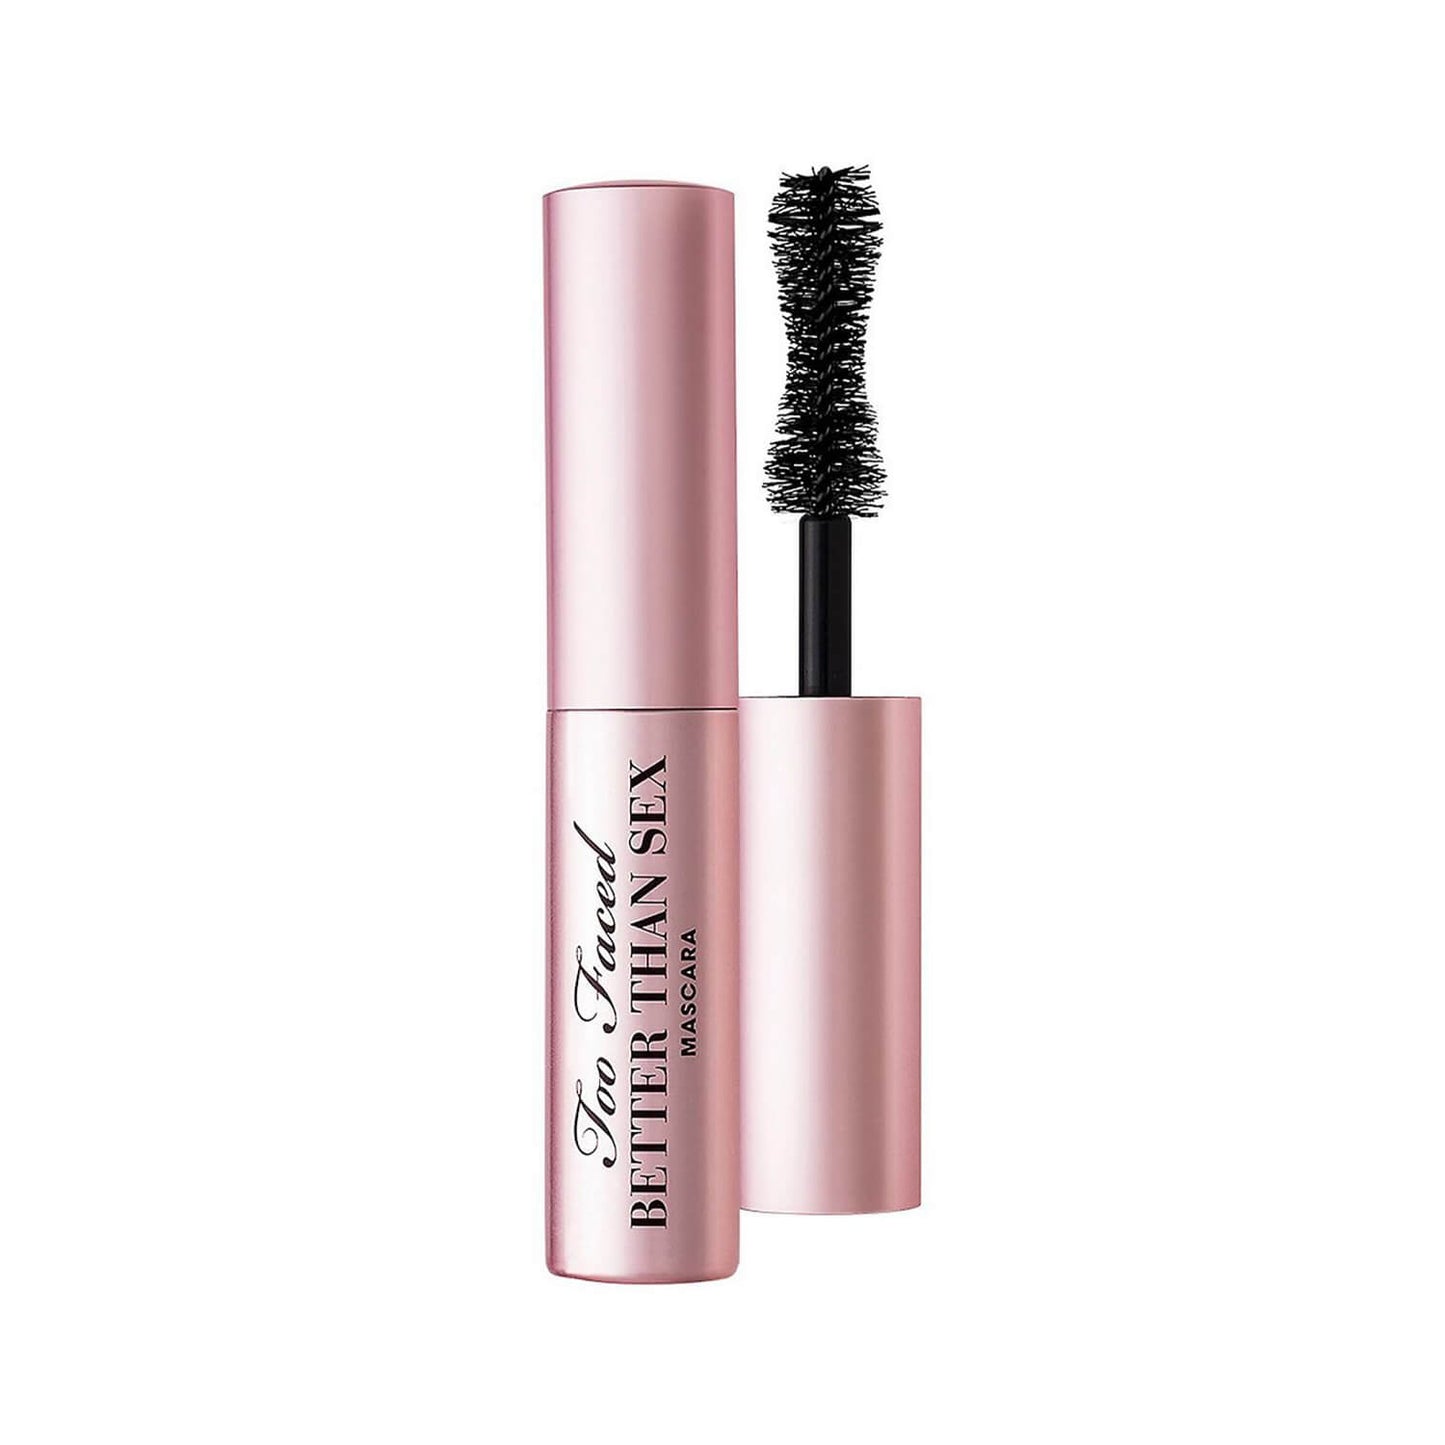 buy too faced better than sex mascara travel size available at heygirl.pk for delivery in Pakistan